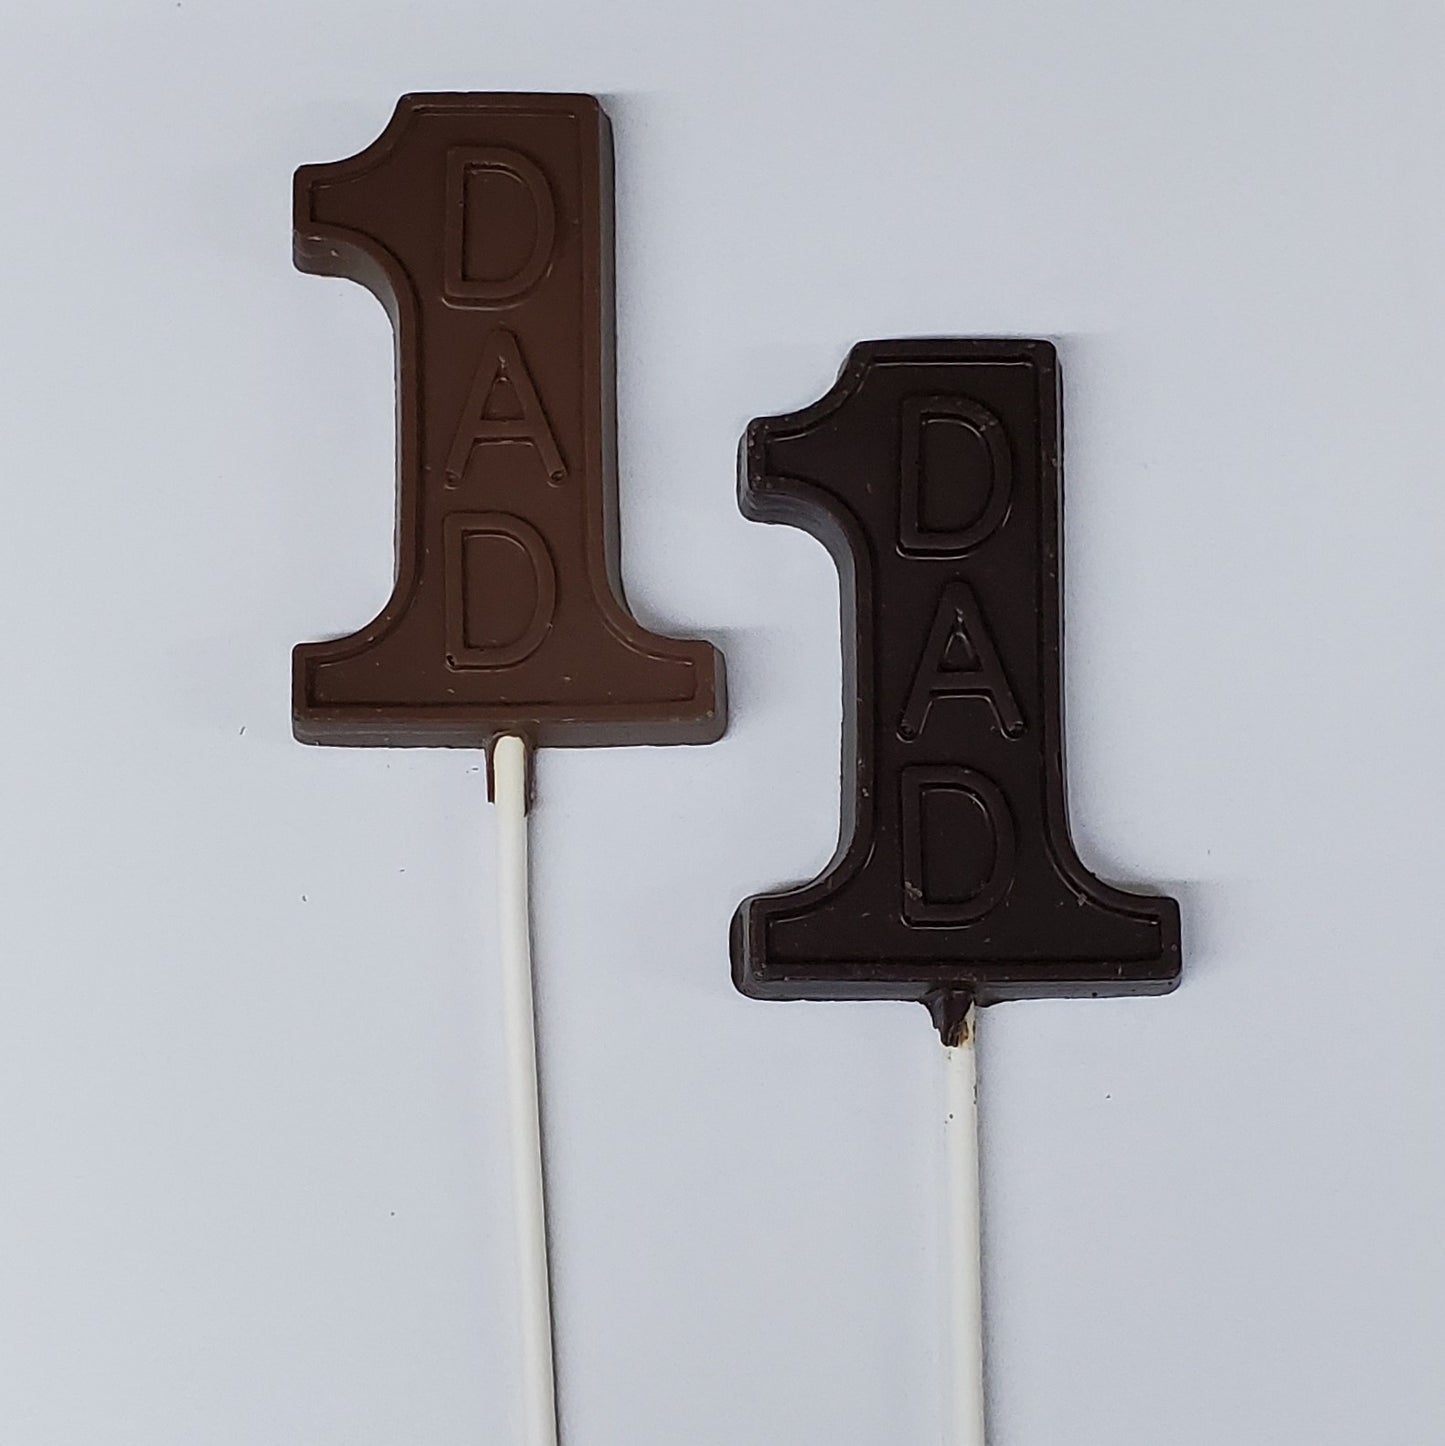 Milk and Dark Chocolate lollipops with the word 'Dad'